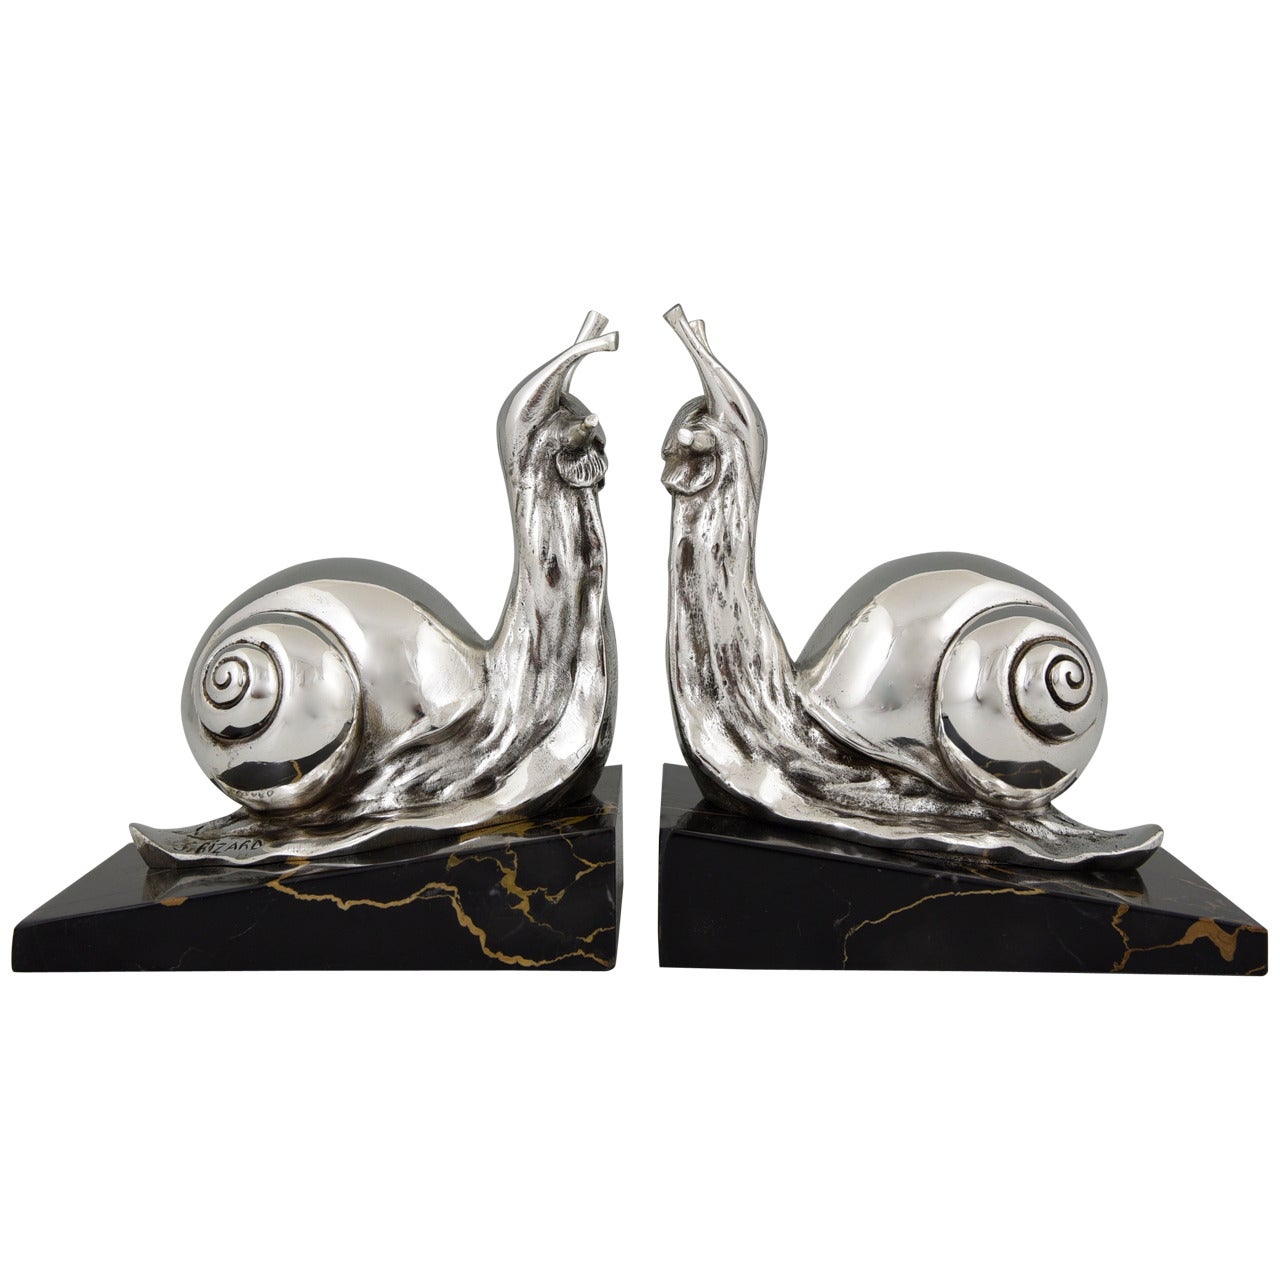 French Art Deco Silvered Bronze Snail Bookends by Suzanne Bizard 1930